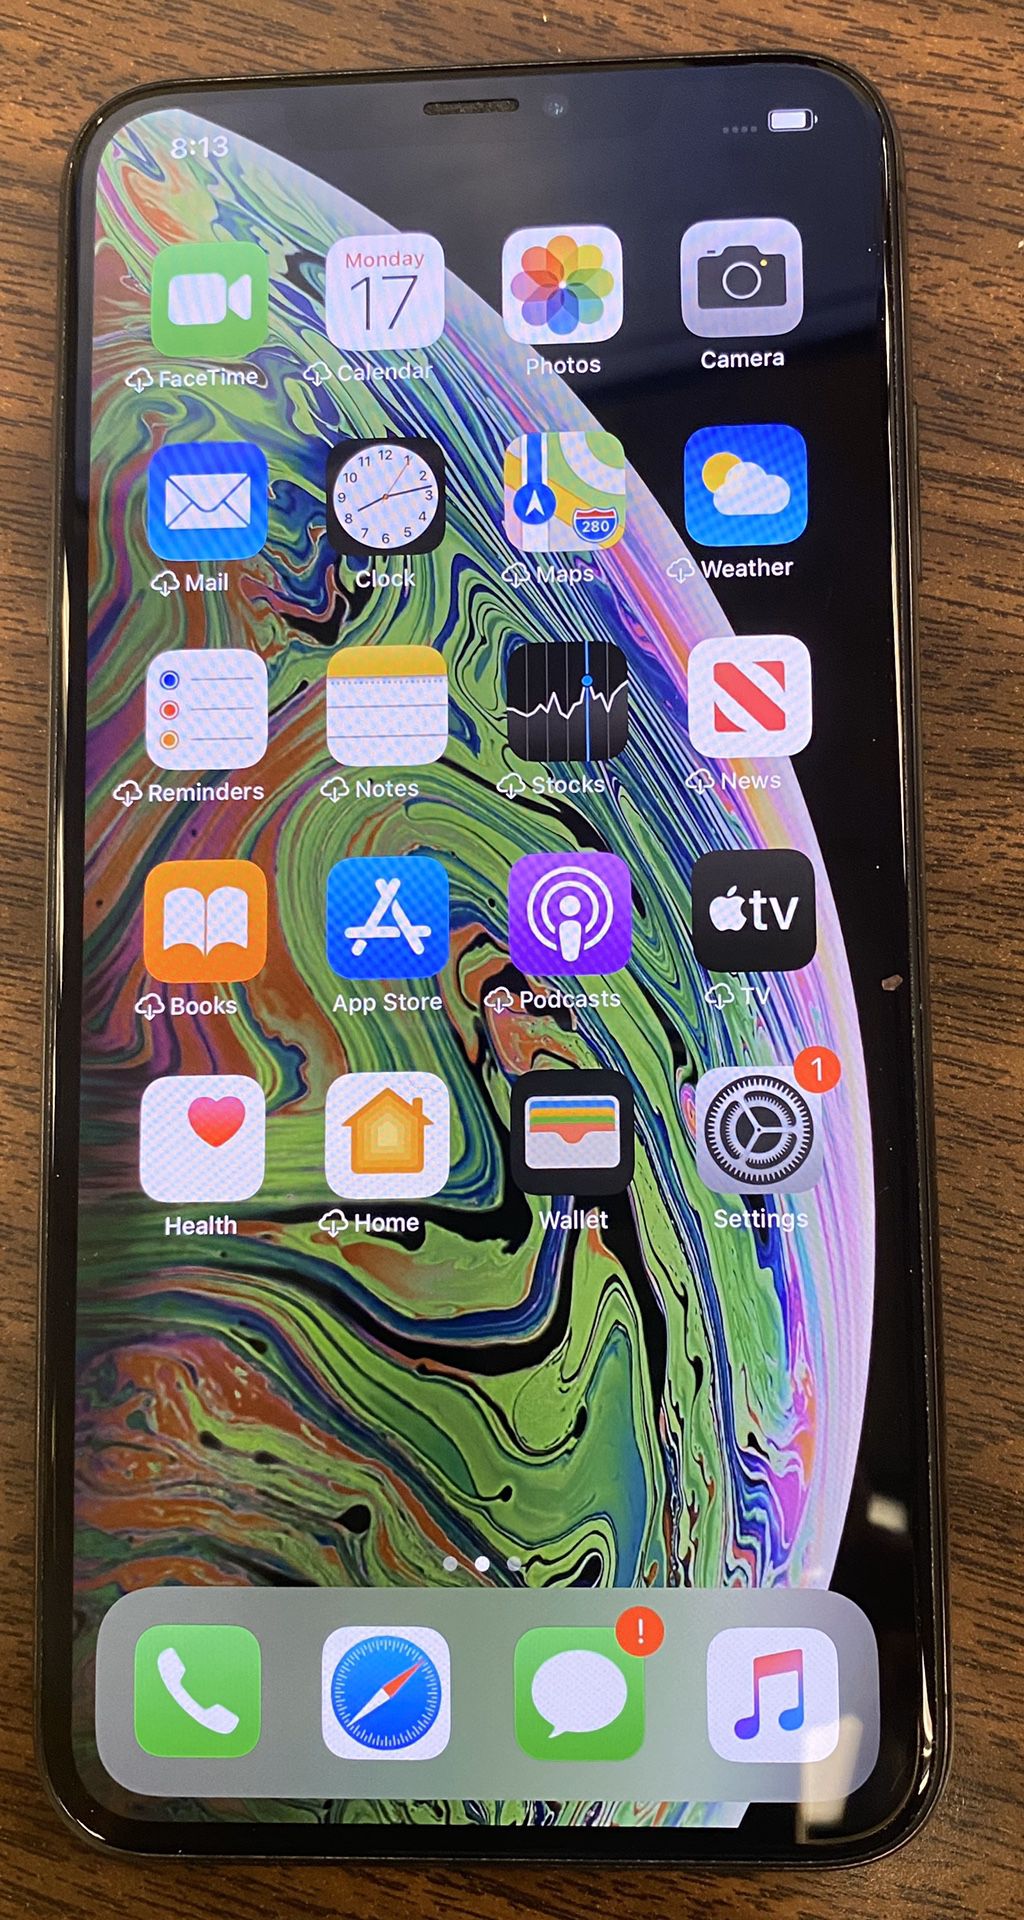 iPhone XS Max - 256 GB - Space Gray - Unlocked - $600 firm